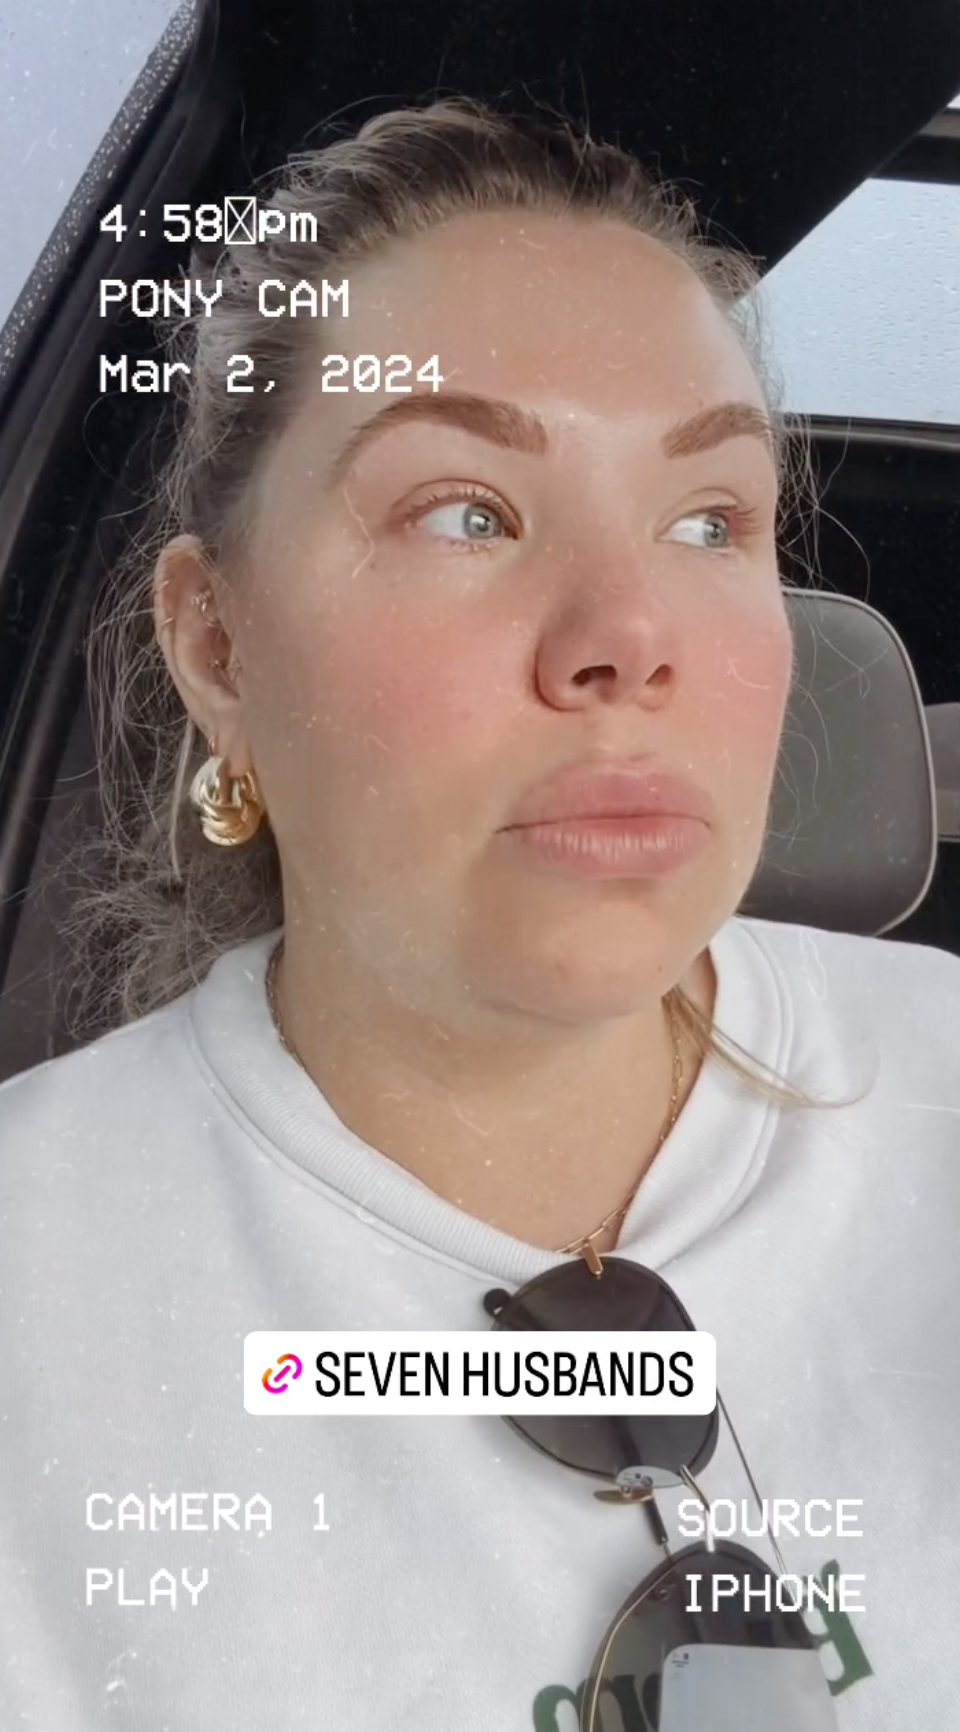 Kailyn claimed she started 'ugly-crying' inside her car after reading the book